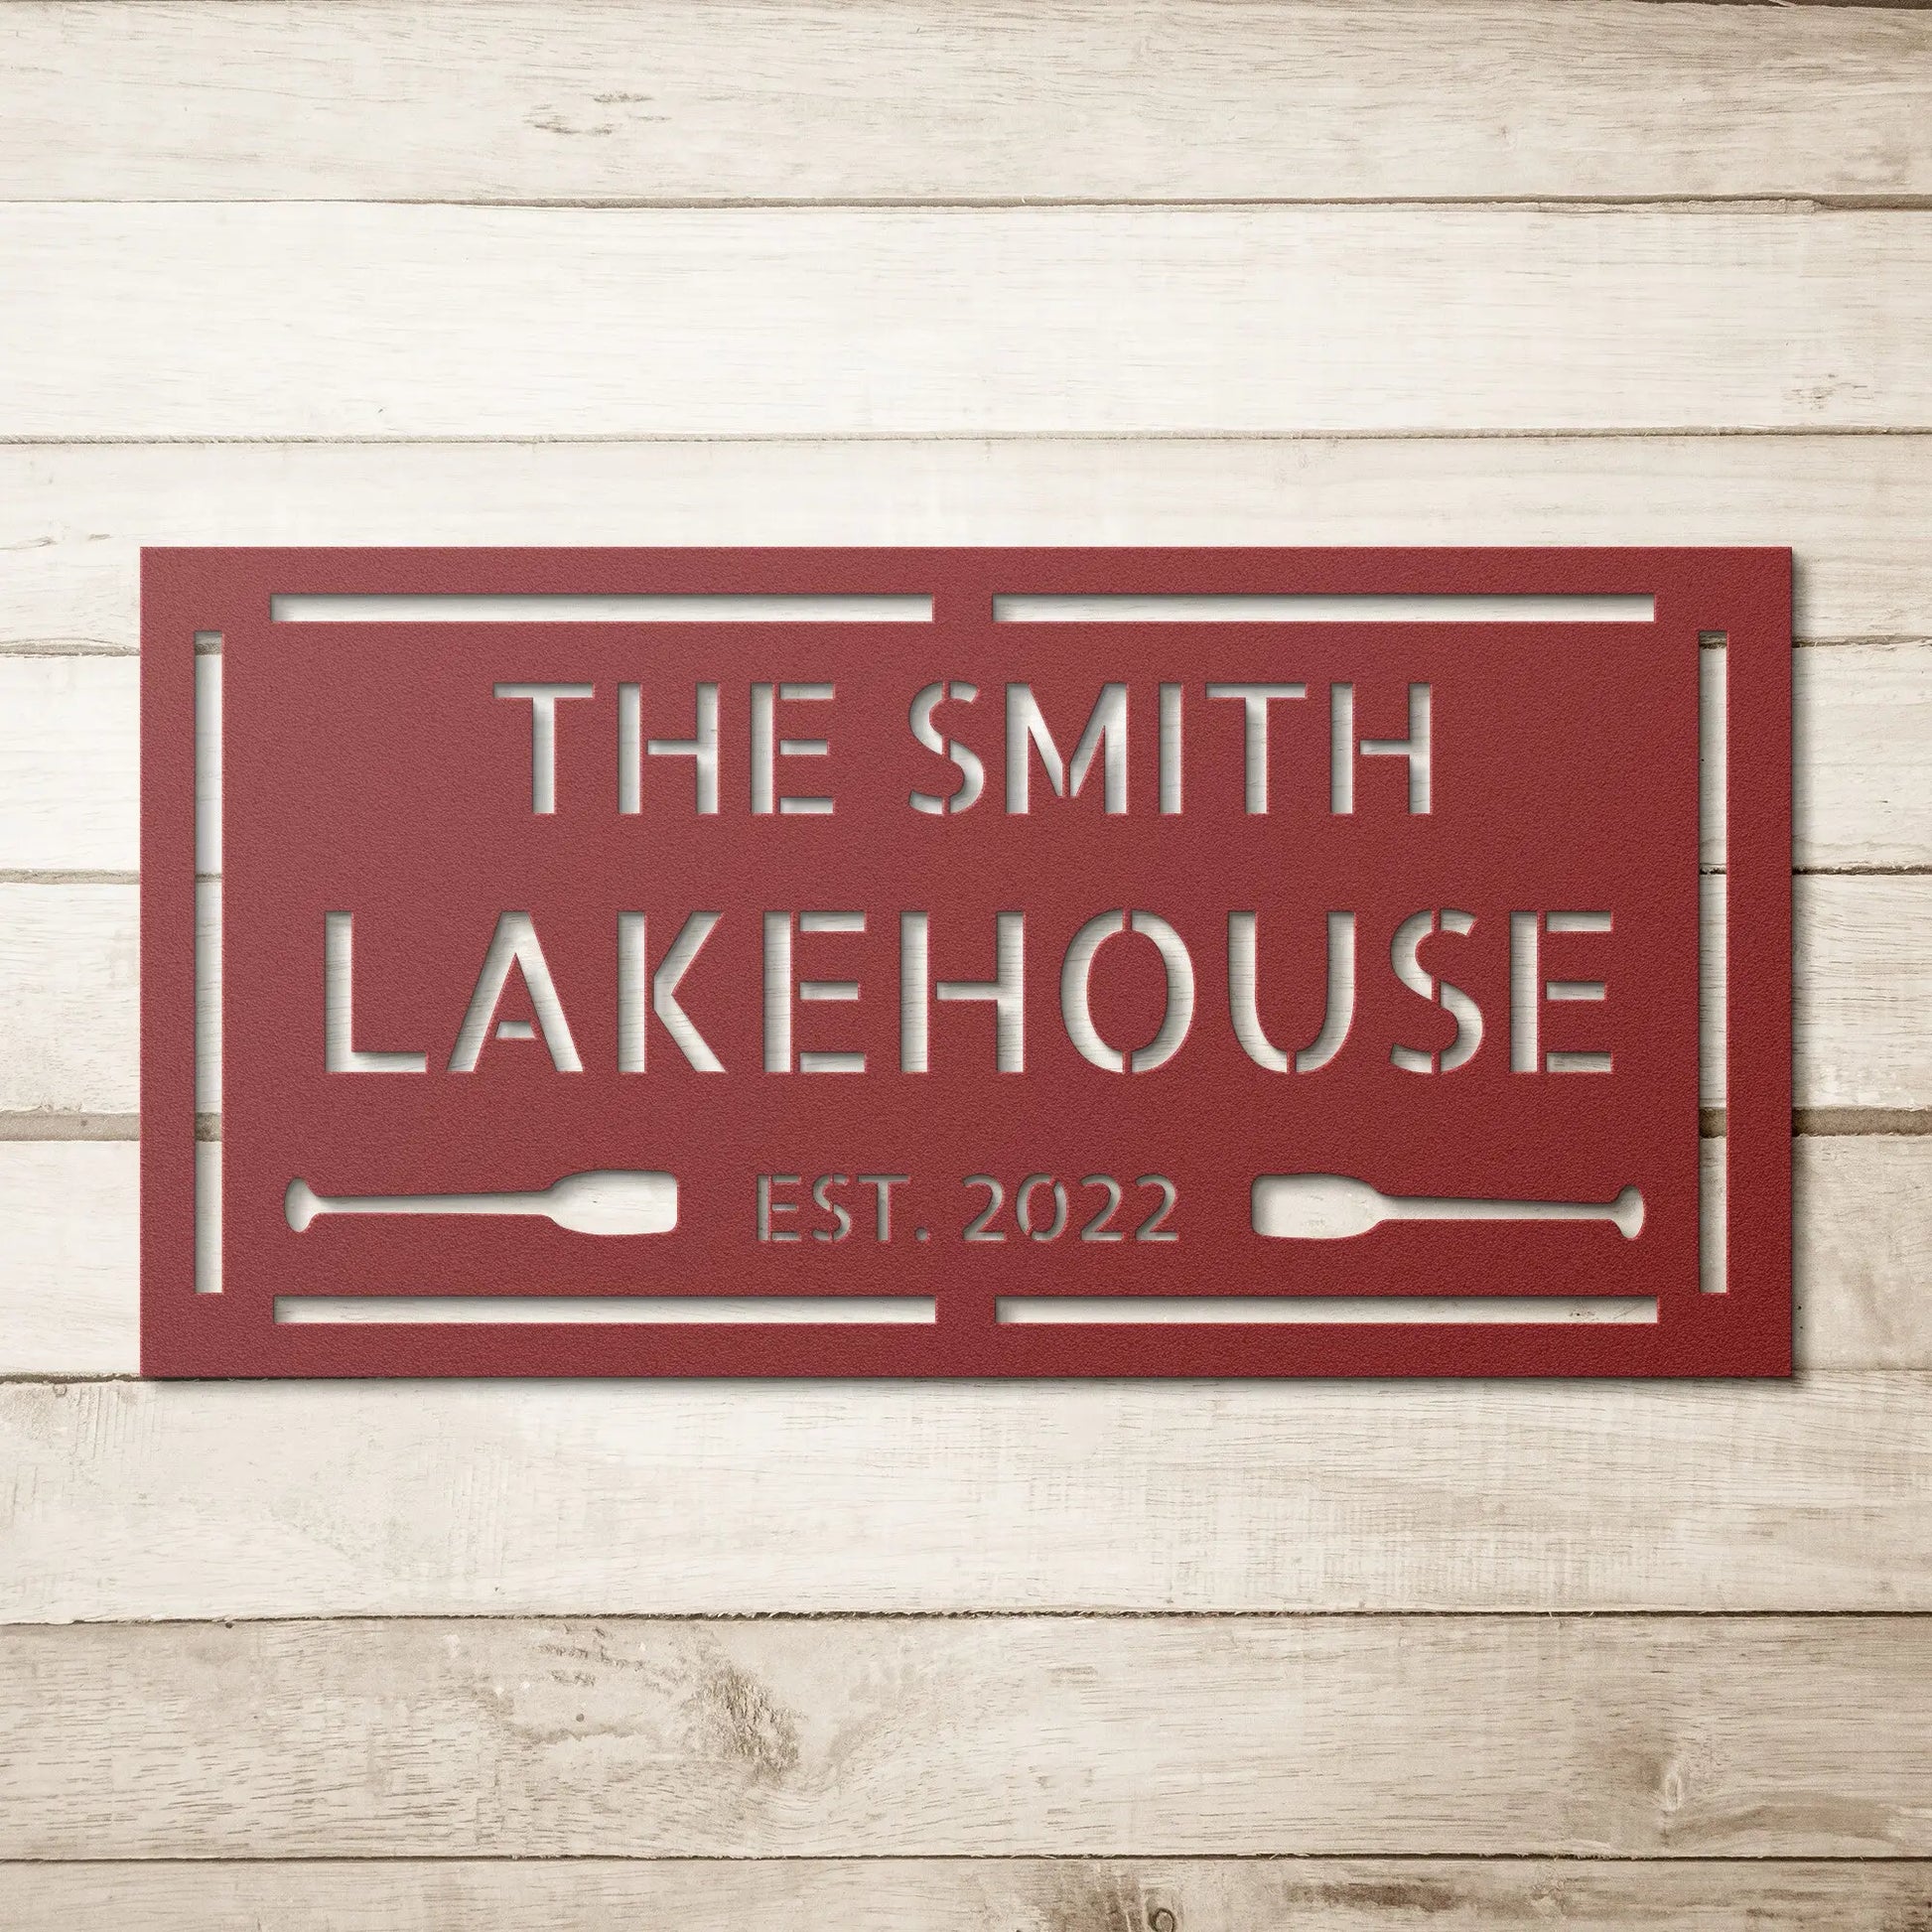 Wall Art Personalized Lake House Sign-Lake House Sign-Boat Oars Decor-Metal Signs-Laser cut Sign-Personalized Sign-Lake House Decor-Boating Sign teelaunch